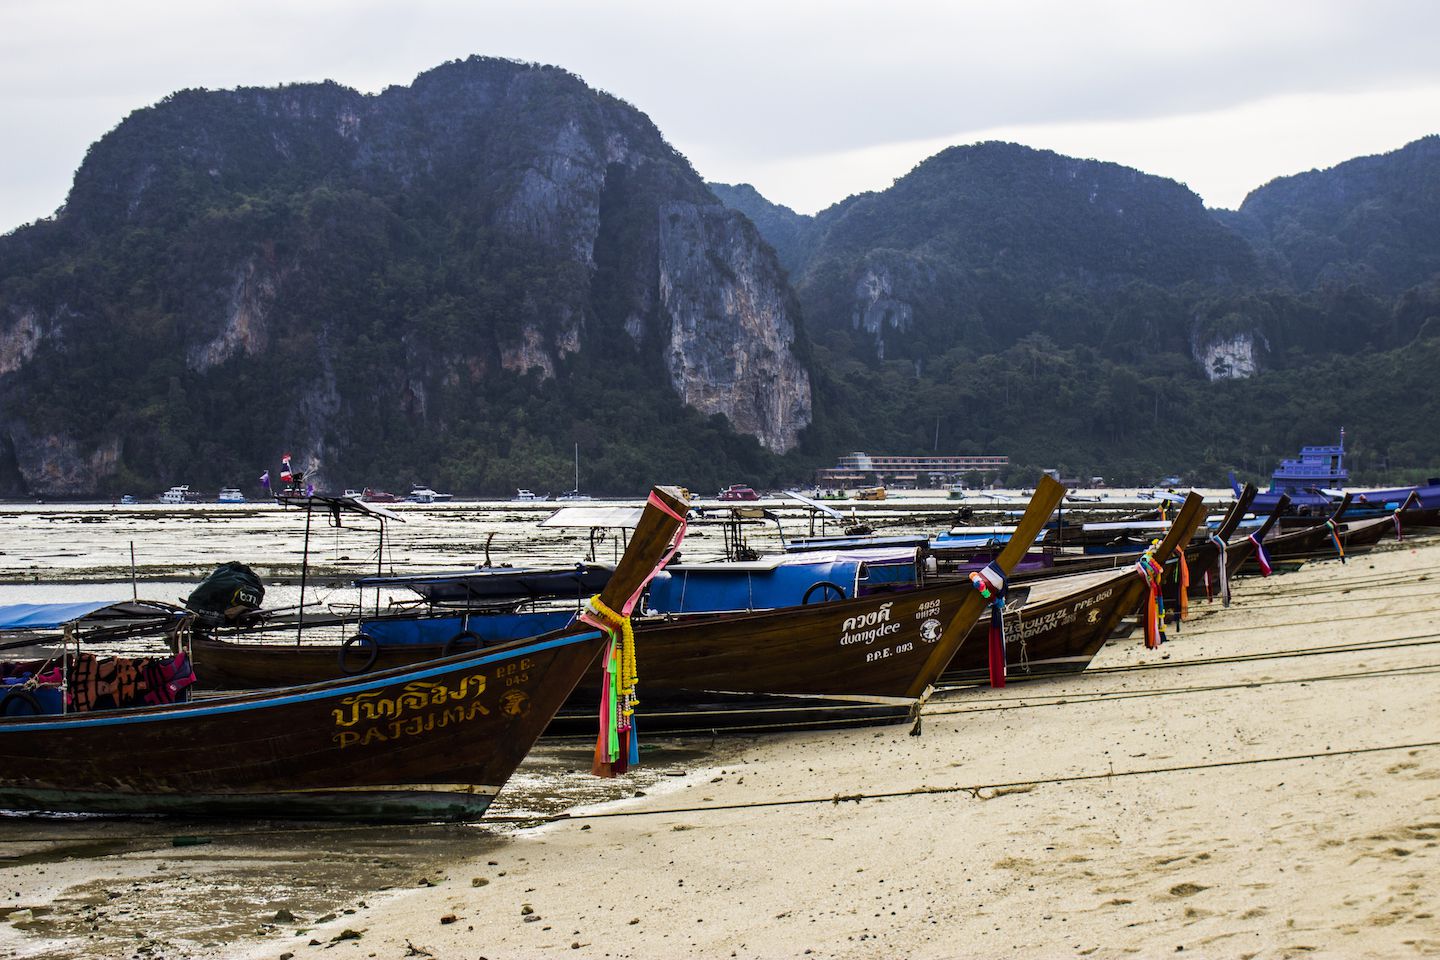 Stranded longtail boats on Koh Phi Phi, Thailand